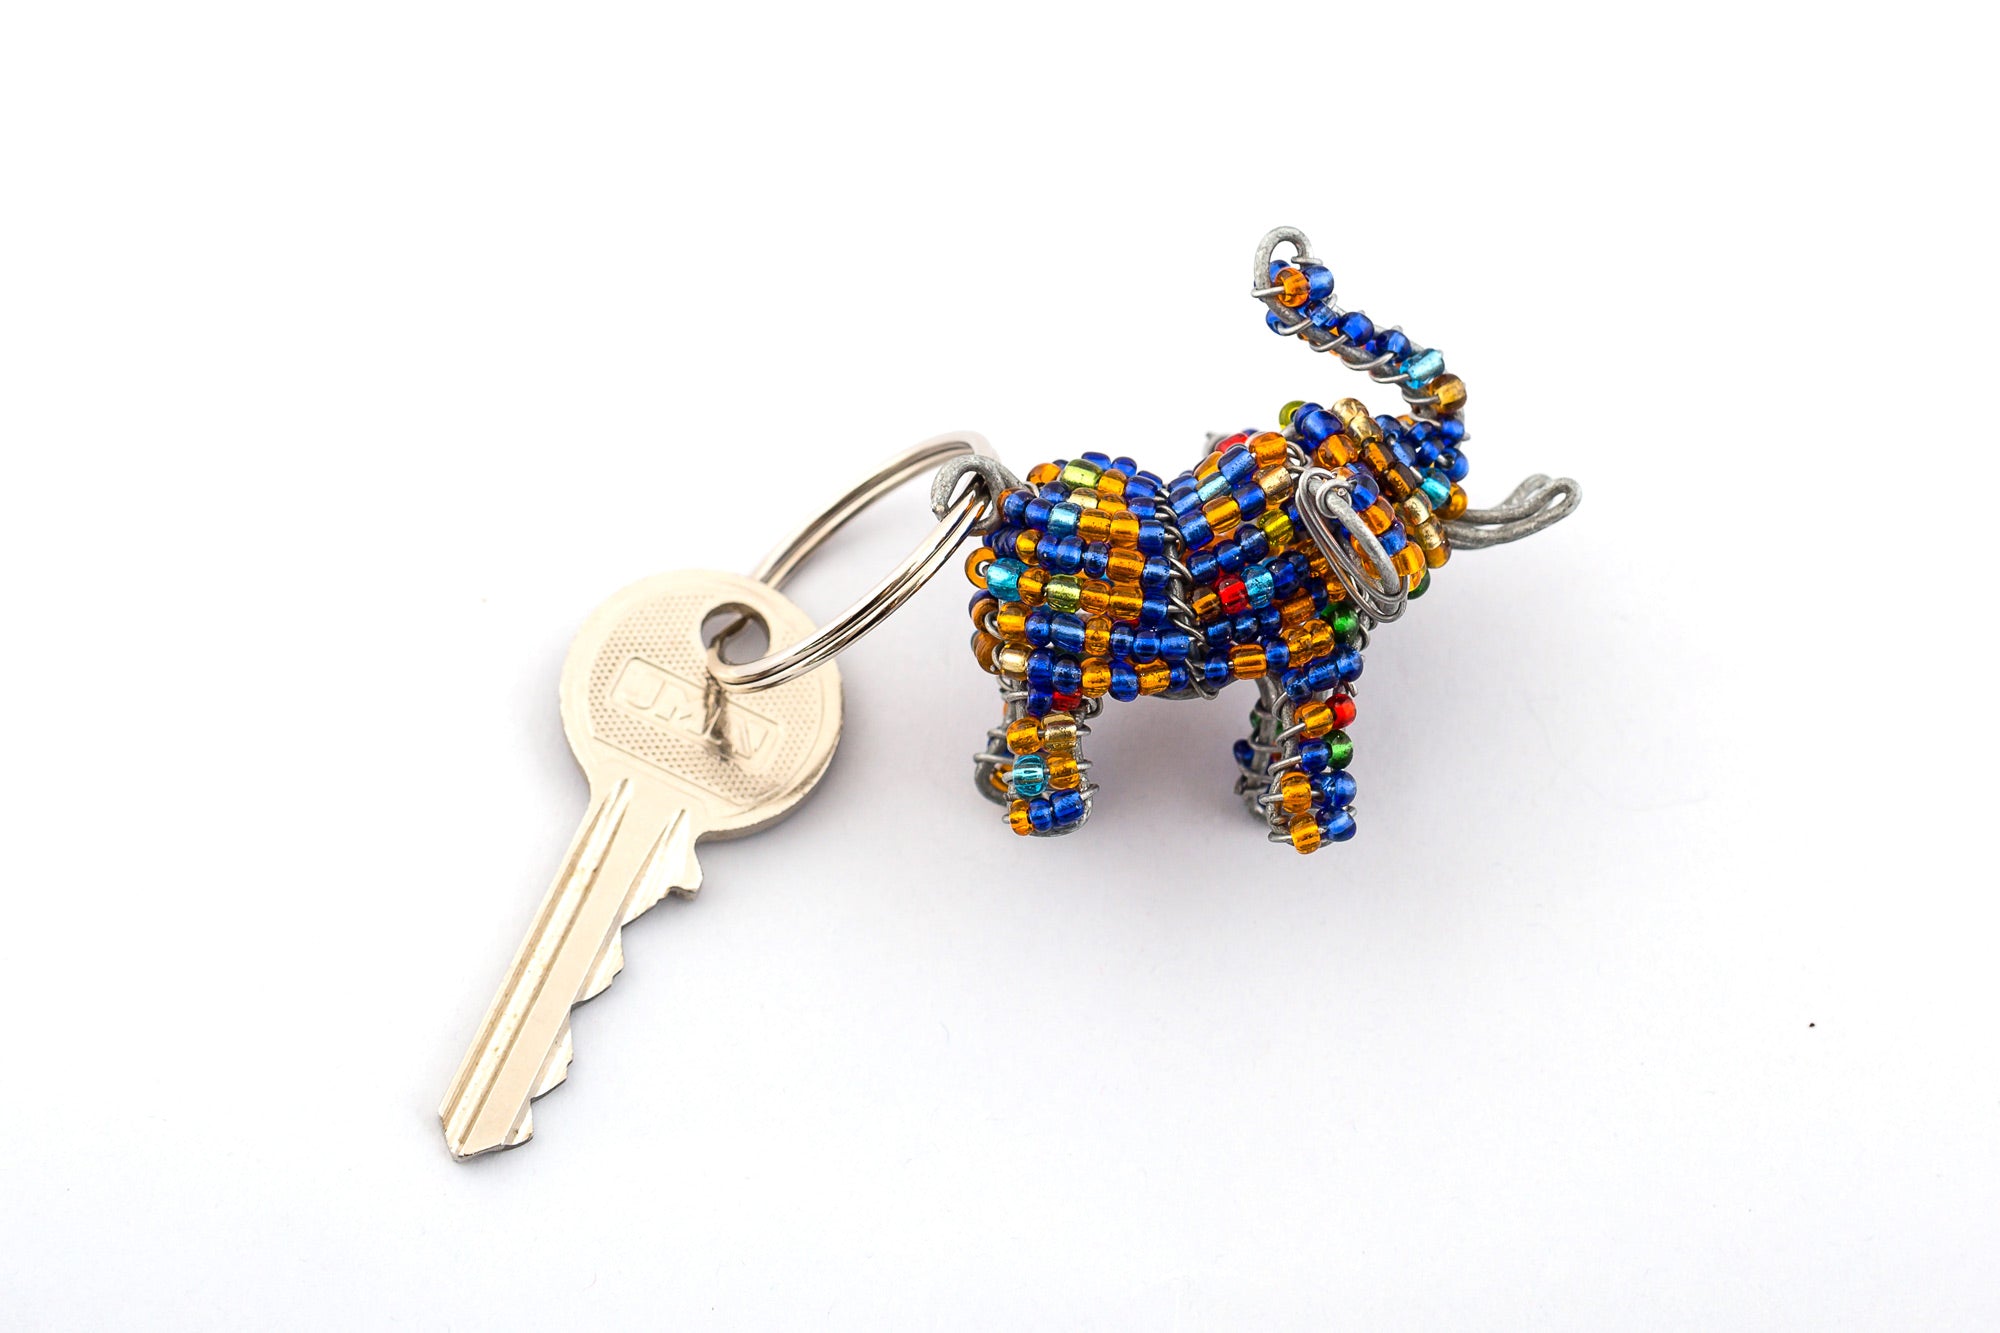 Beaded elephant key chain. Handmade in blue & golden beads - with trunk up for good luck! Fair trade product.